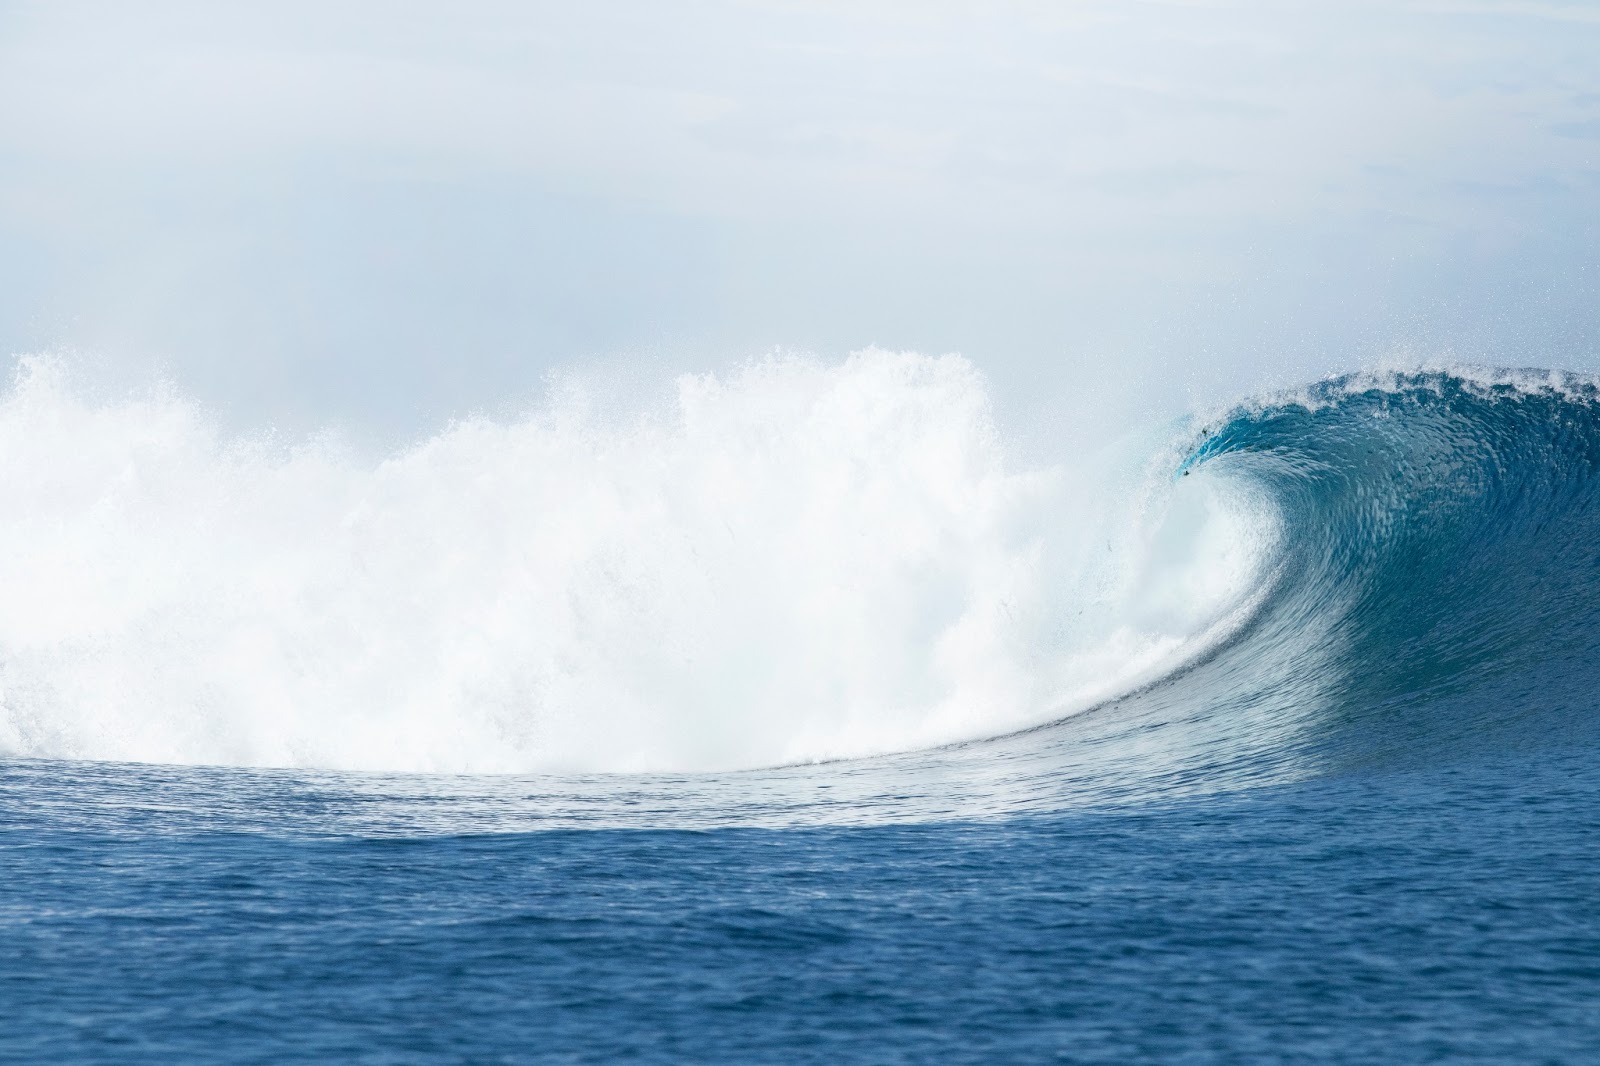 A perfect surfing wave in the crystal-clear waters of the Mamanuca Islands.